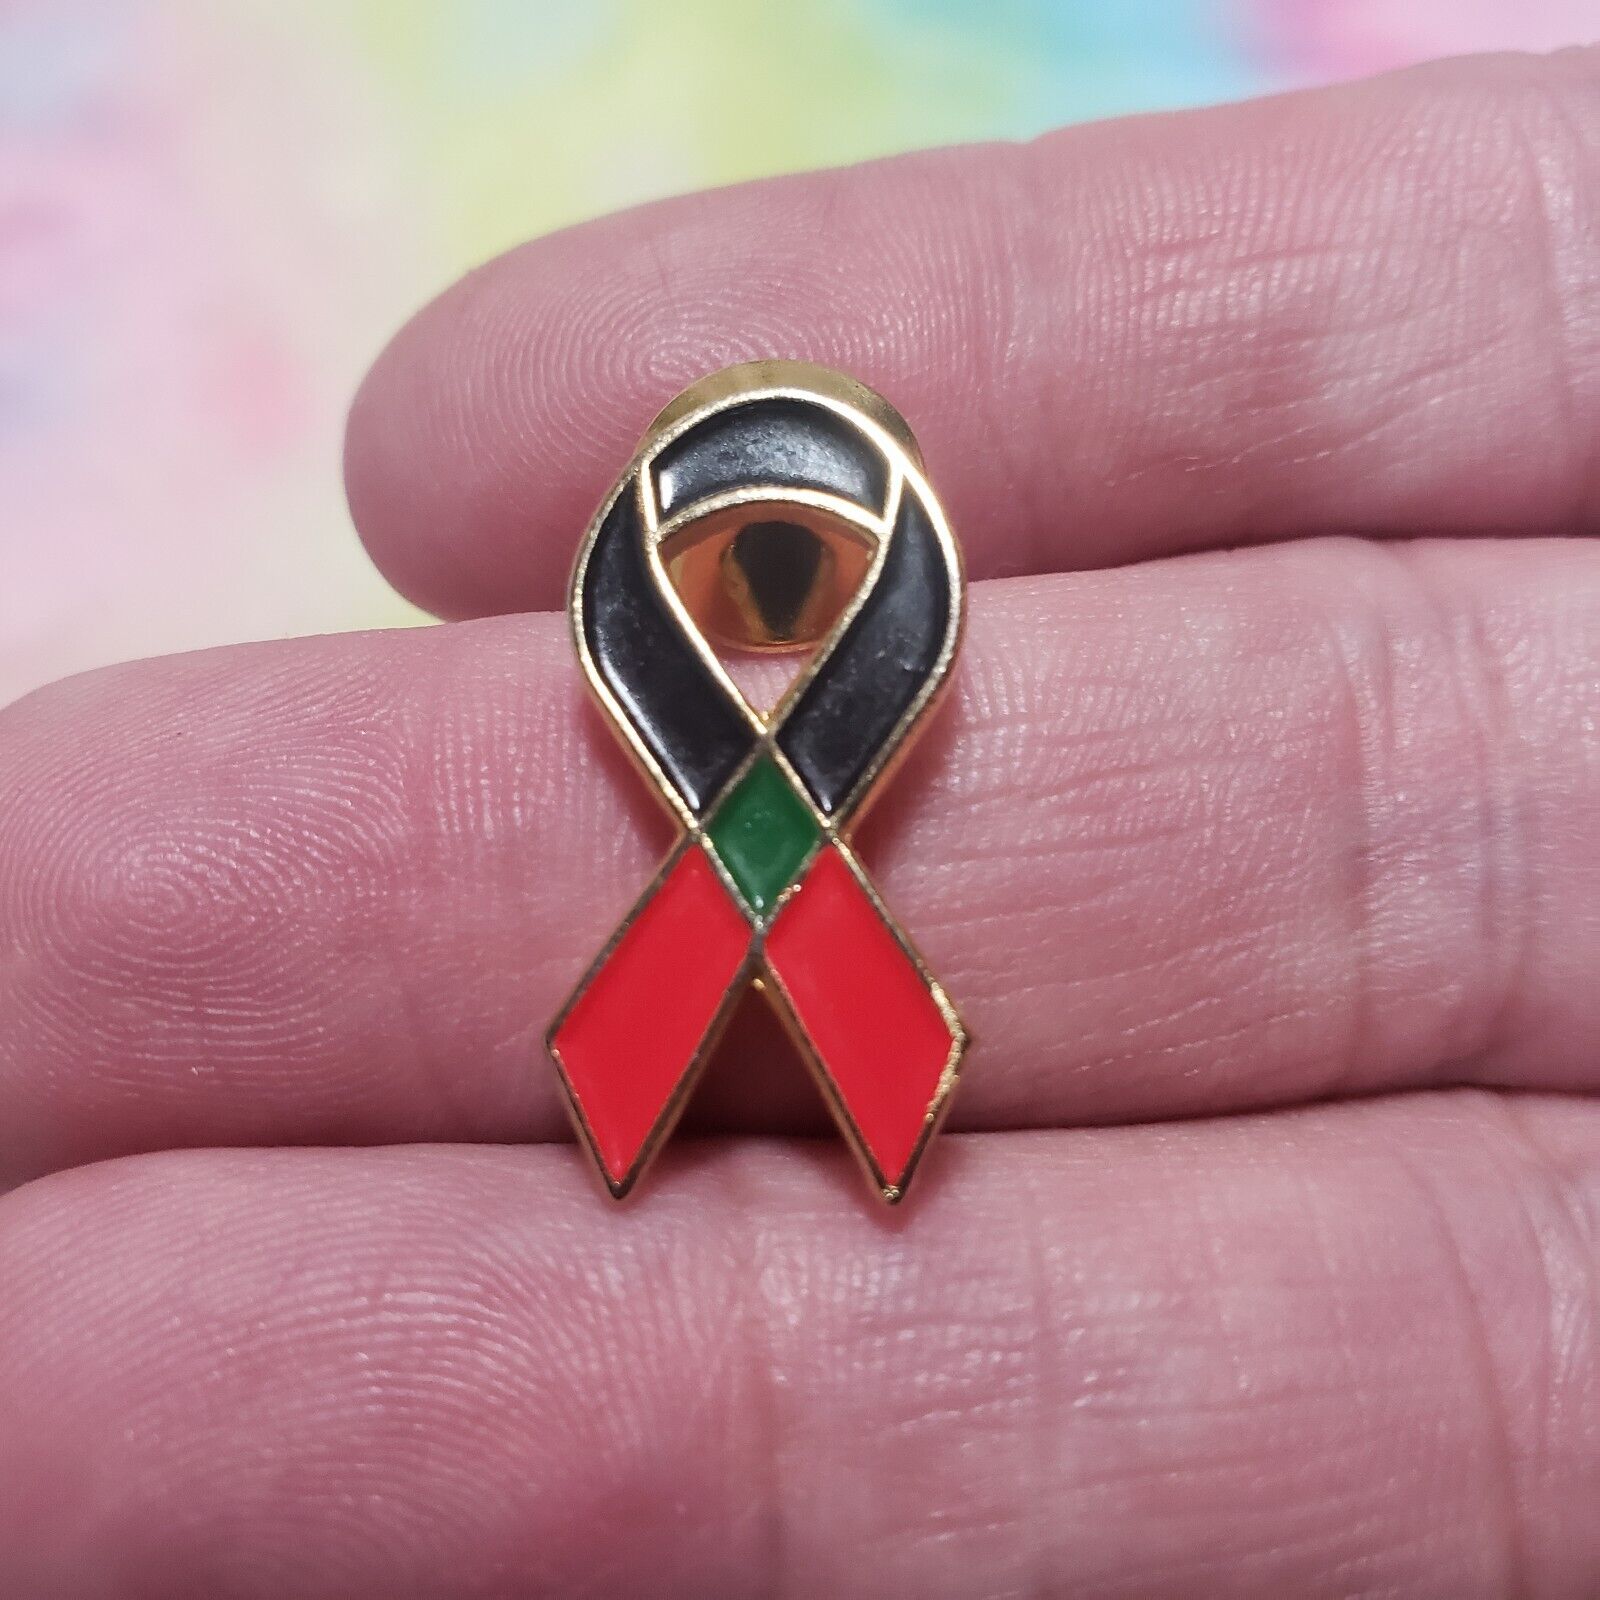 African American AIDS Awareness Lapel Pin National Black HIV Day February 7